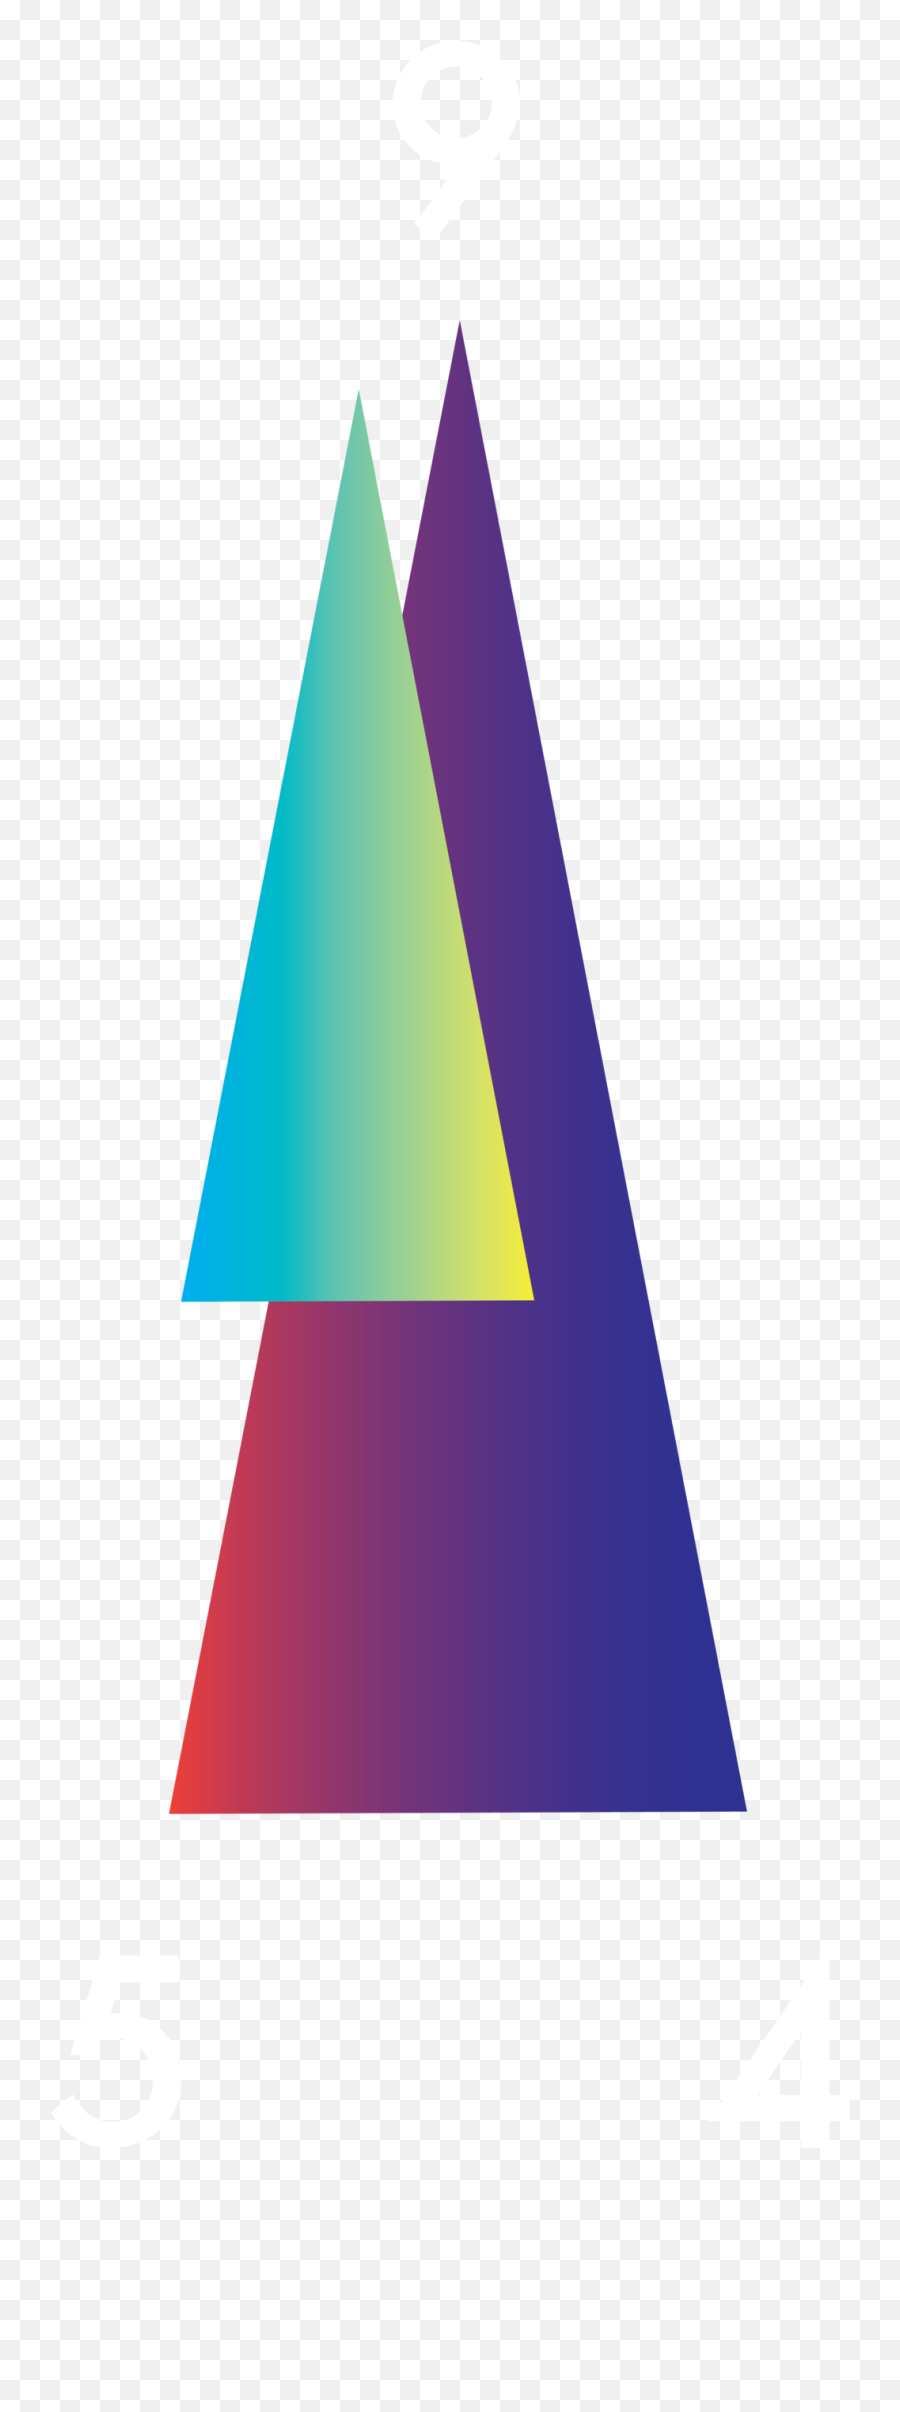 Fixes Stems Enneagrammer - Vertical Emoji,Color Cone Of Emotion